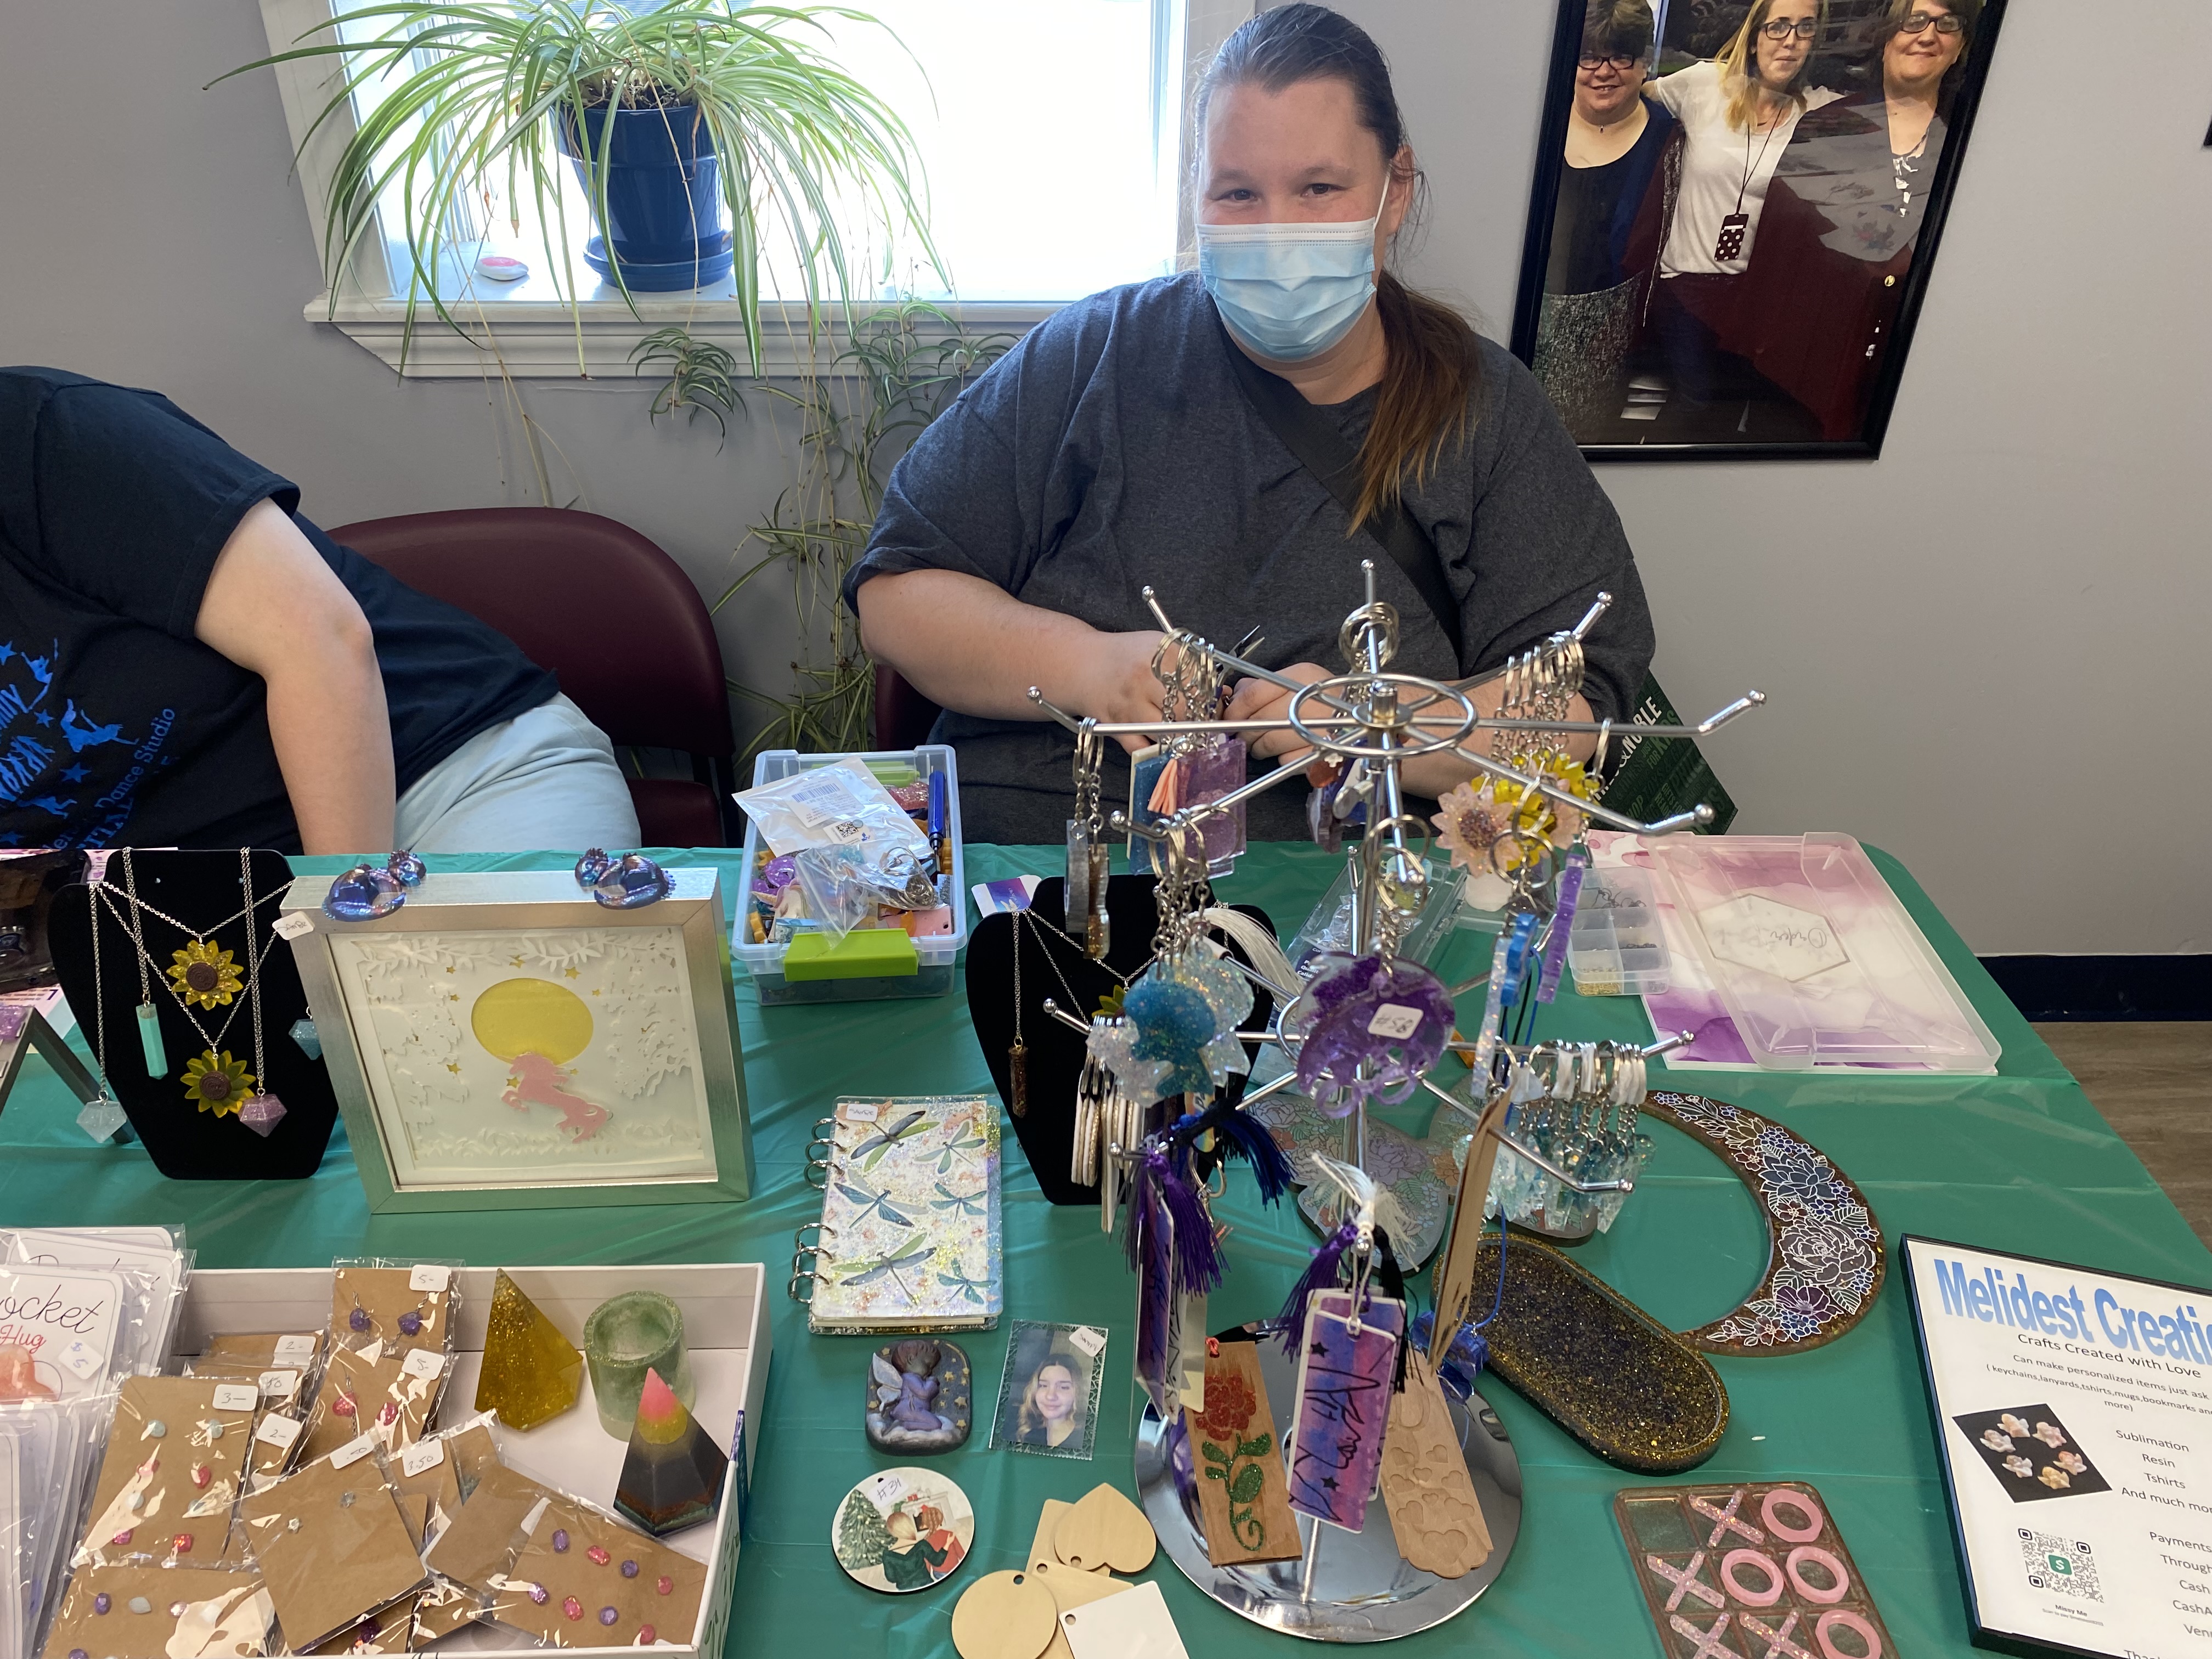 Image of a white female with a gray sweater and brown hair in a ponytail. She is wearing a blue mask and is sitting in front of a green table. The table has an assortment of jewelry, decorations, and other crafts. Another person is on the left side leaning out of view.